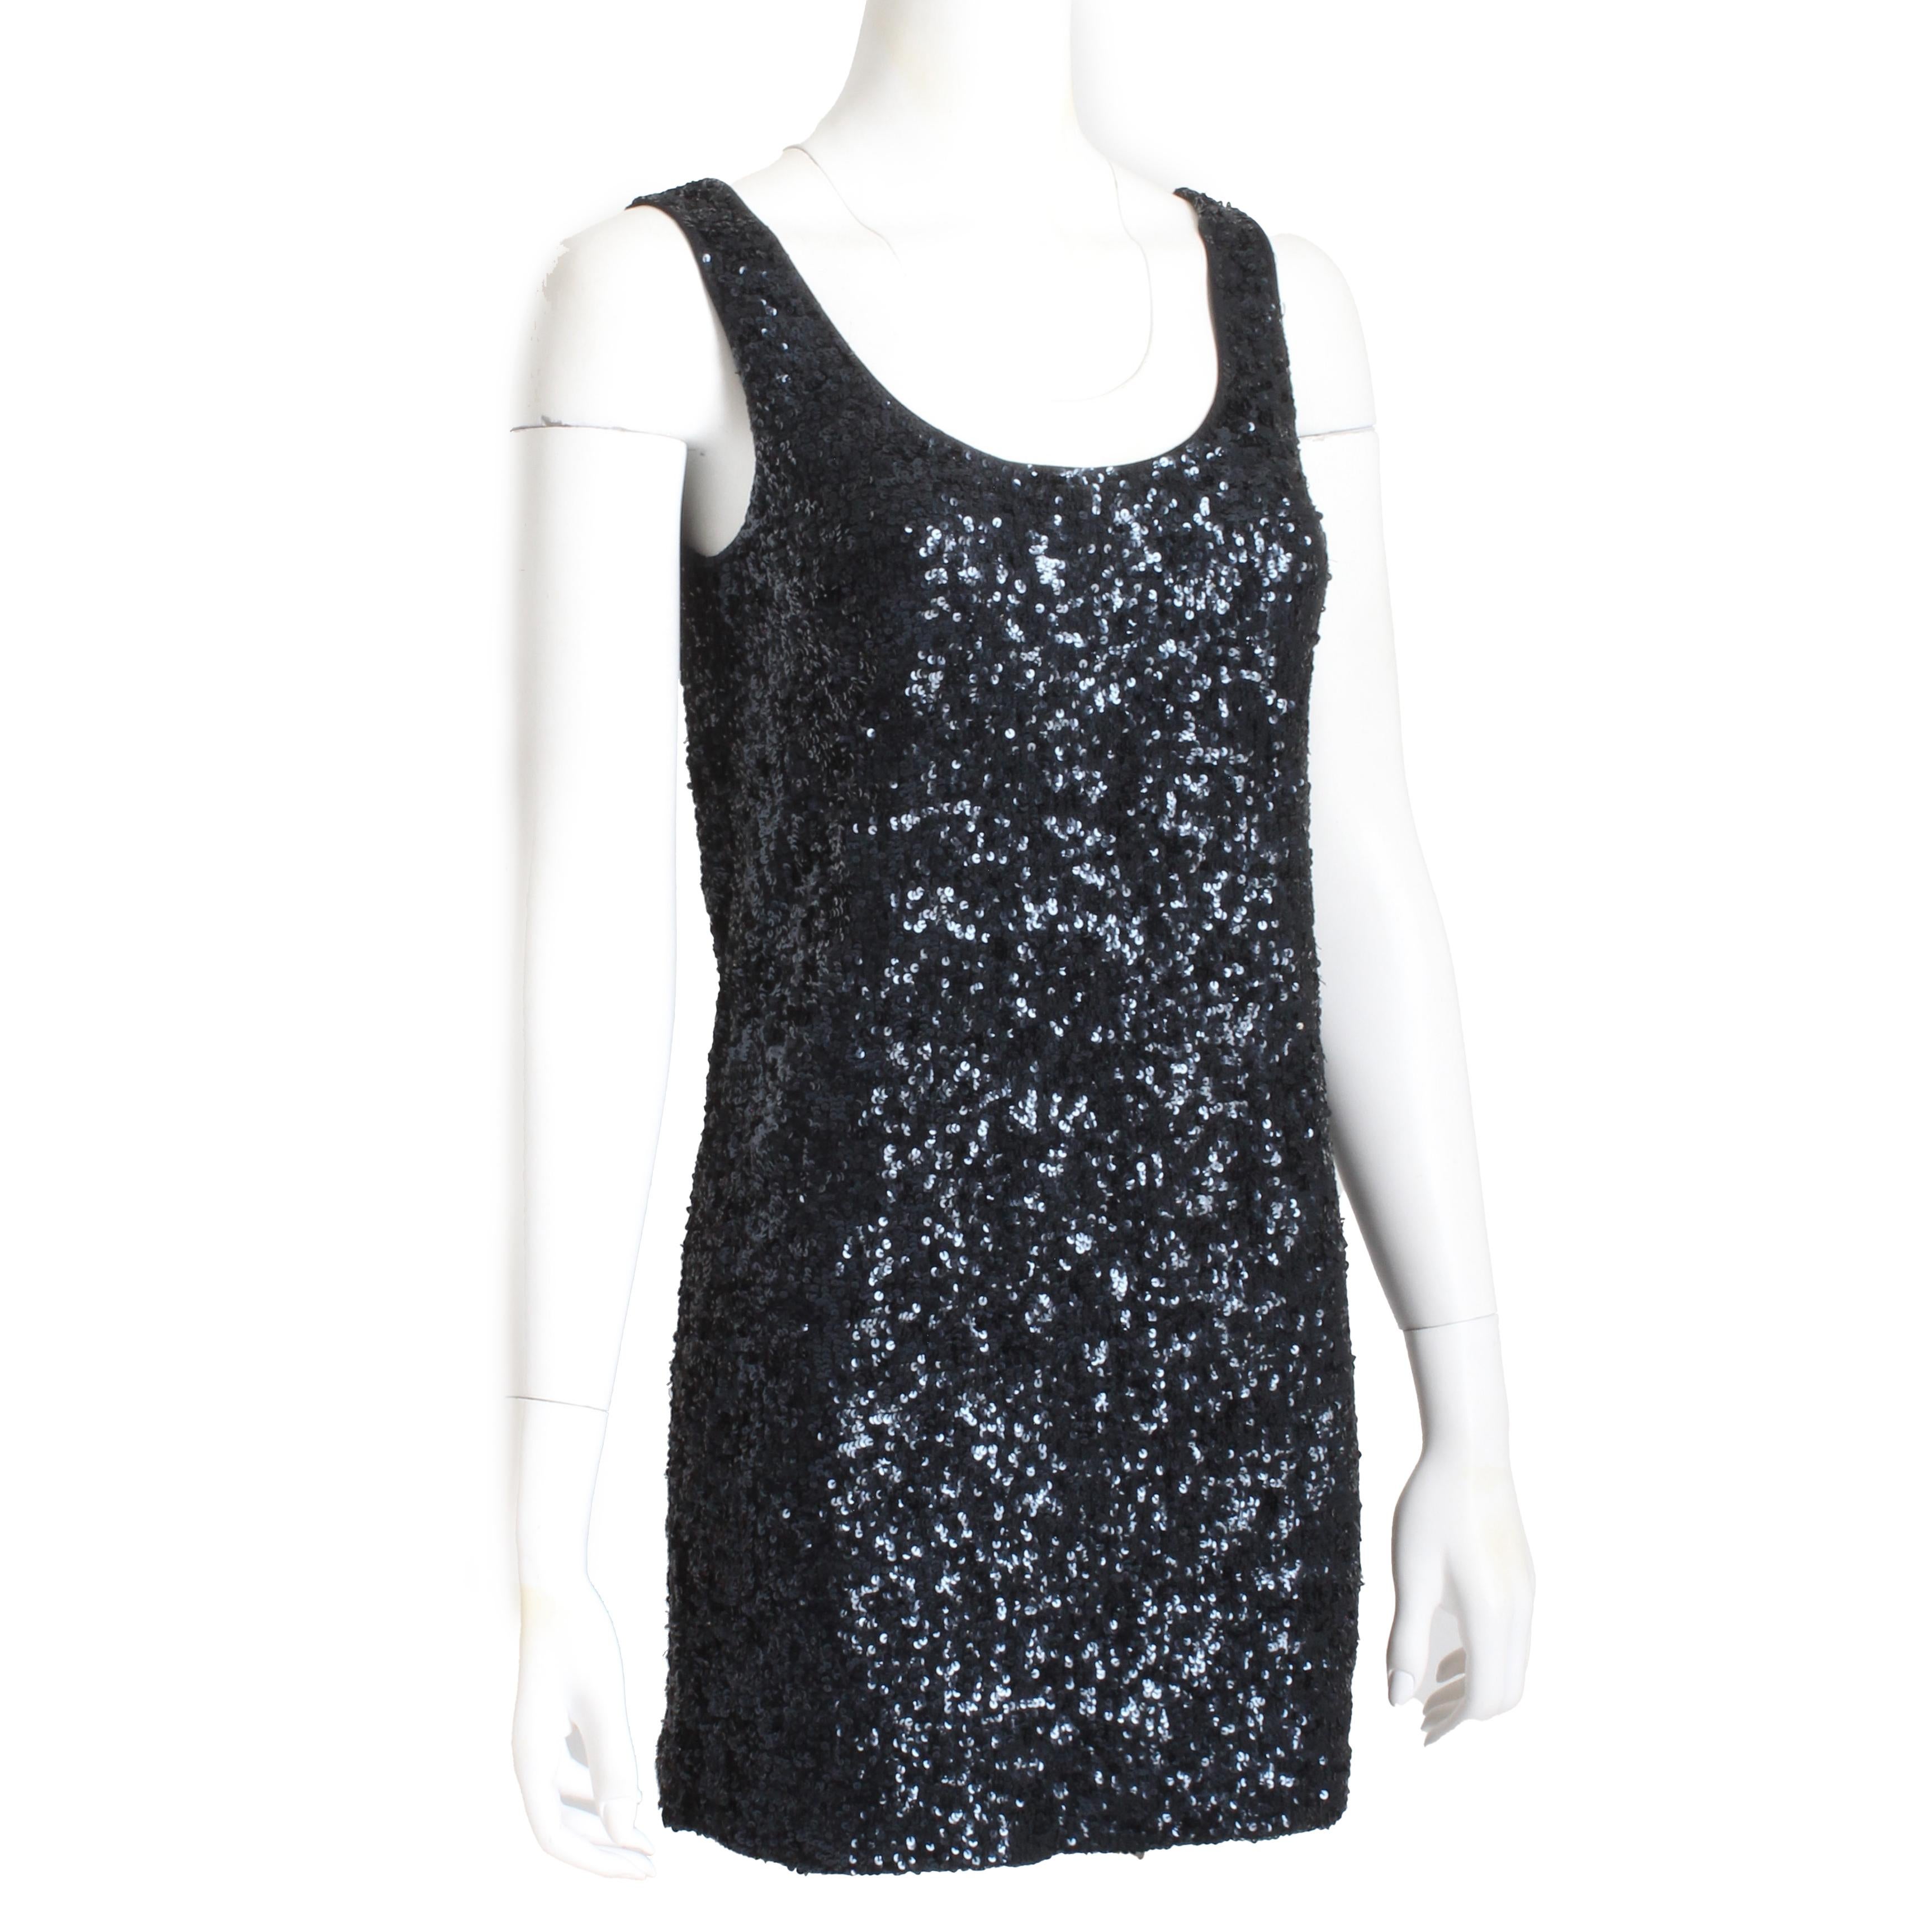 Authentic, preowned, vintage Donna Karan New York cocktail or party dress, likely made in the 90s. Made from a stretchy silk knit, it's covered in black sequins throughout, which shimmer and shine in certain light! 

Incredibly chic and sexy, this